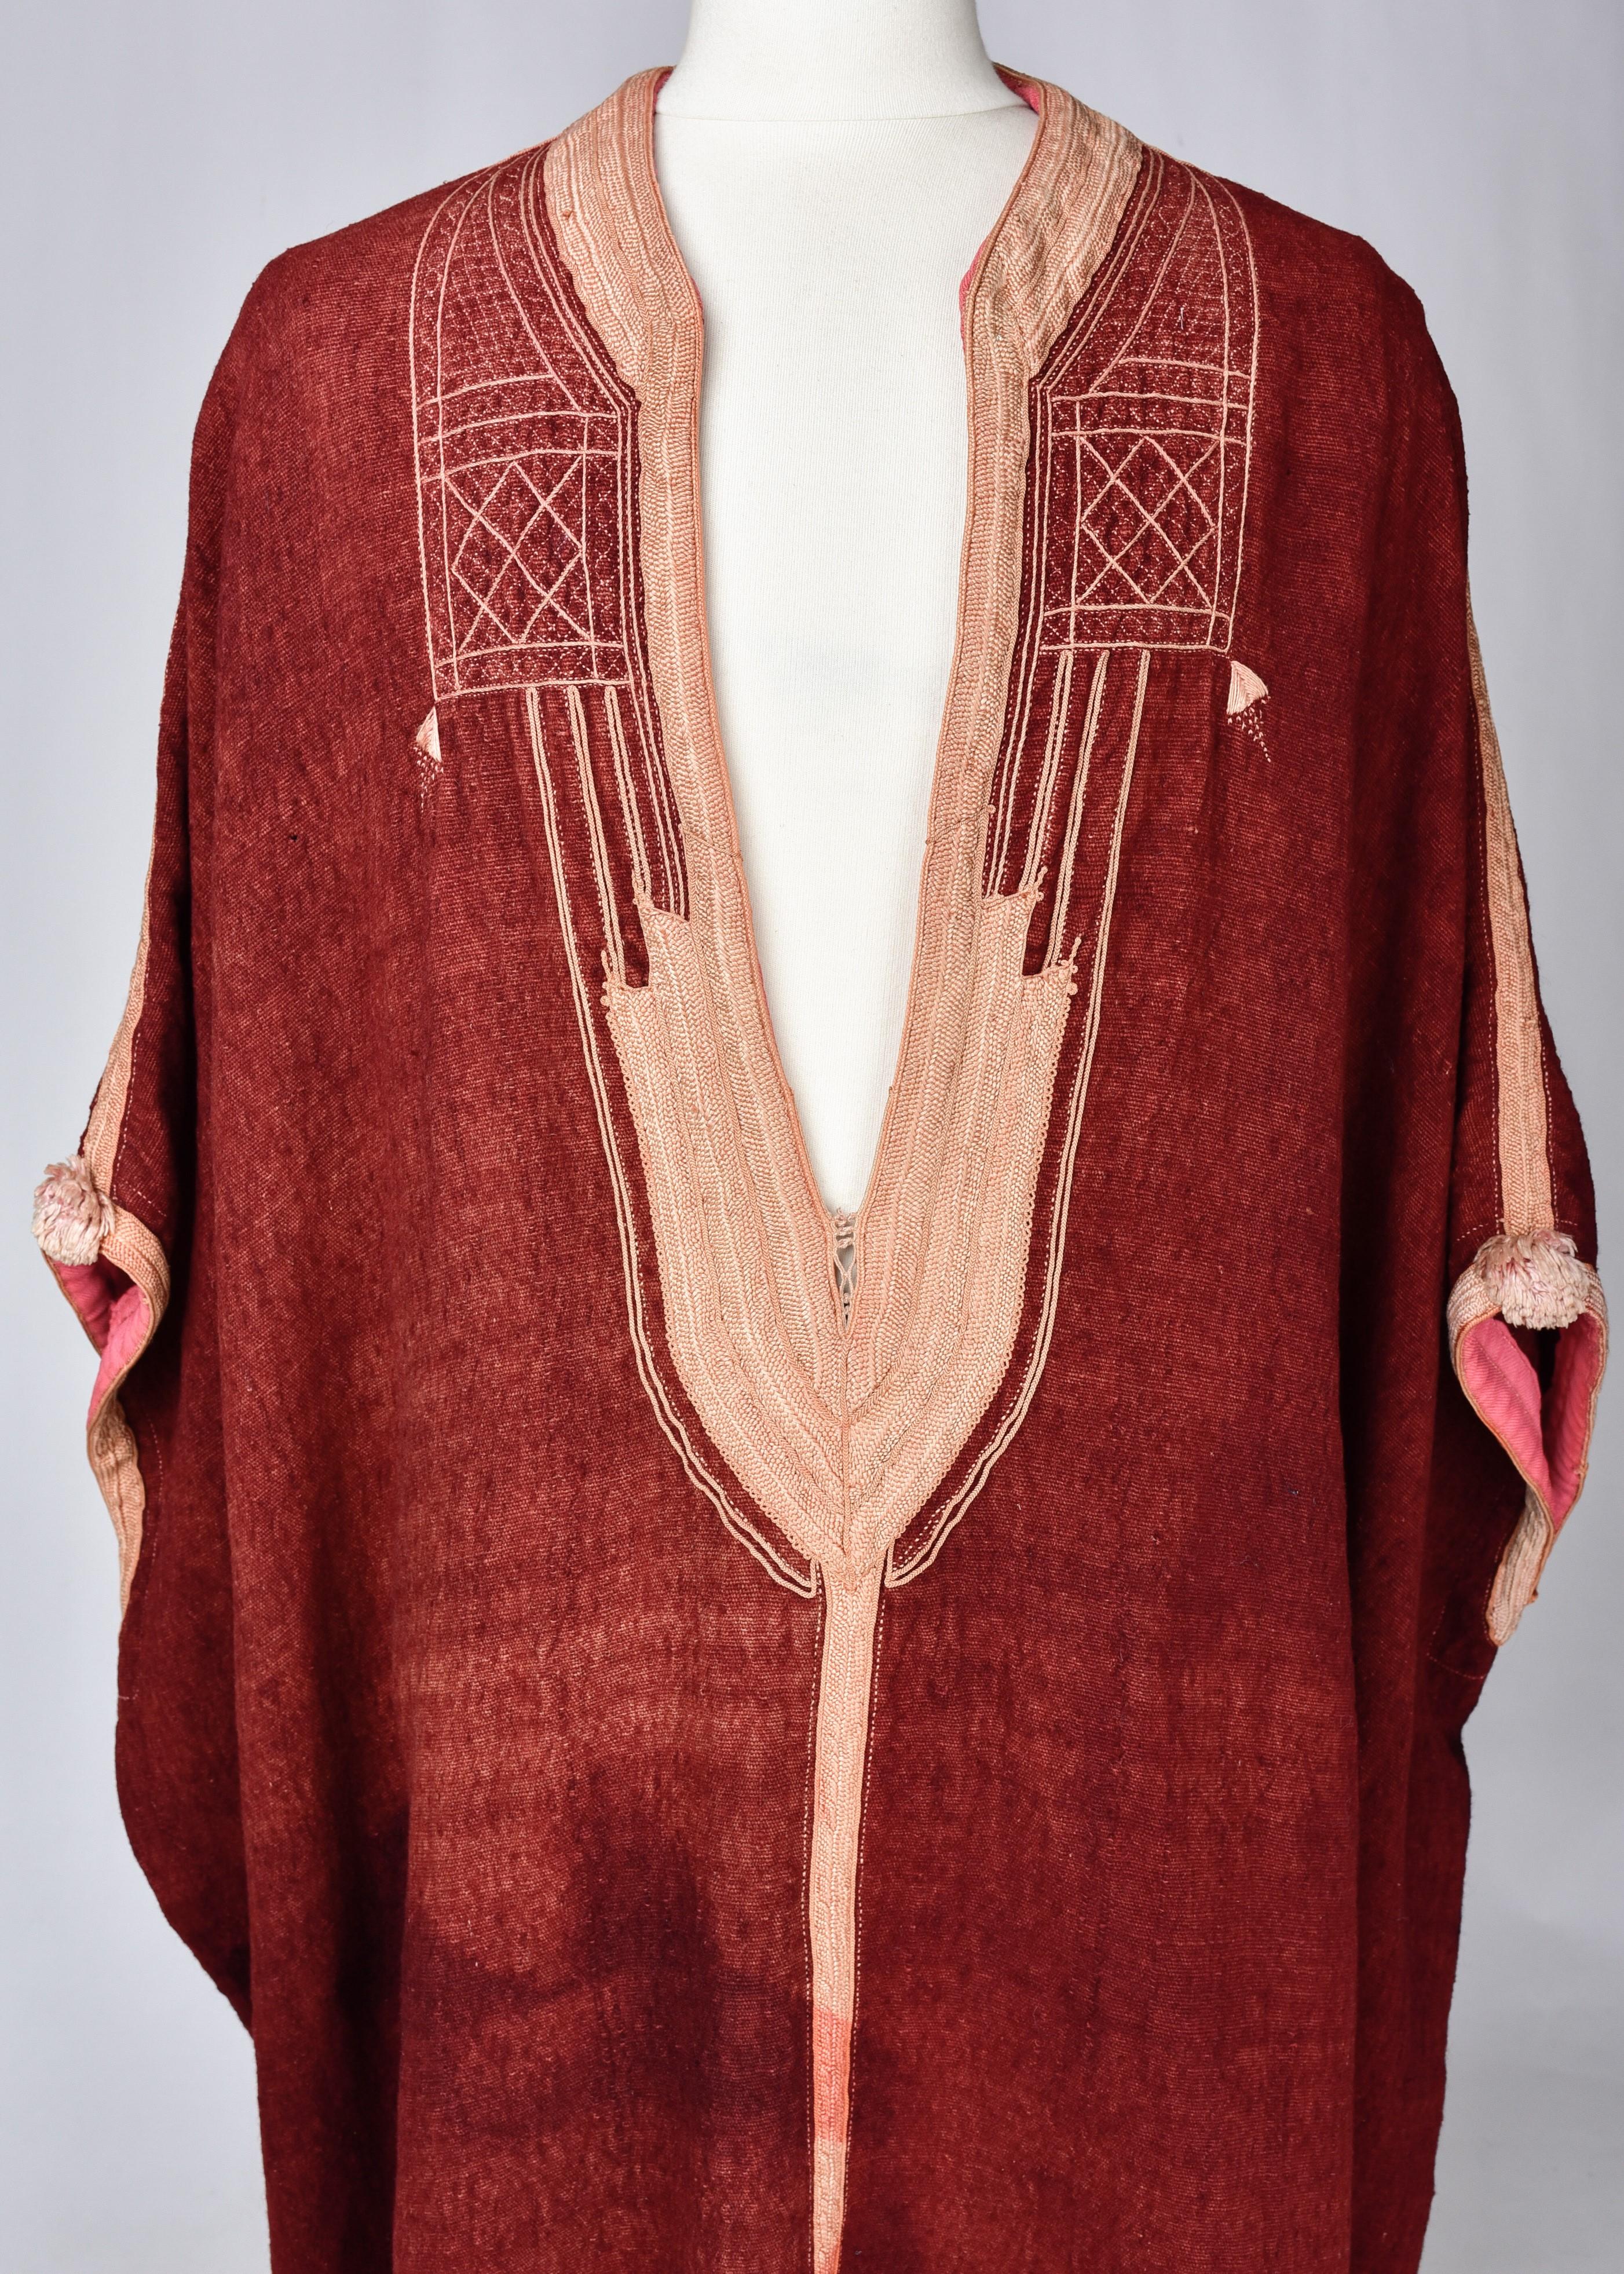 A Berber Djellaba in Dyed Cochineal Embroidered Wool - North Africa Circa 1900 For Sale 1